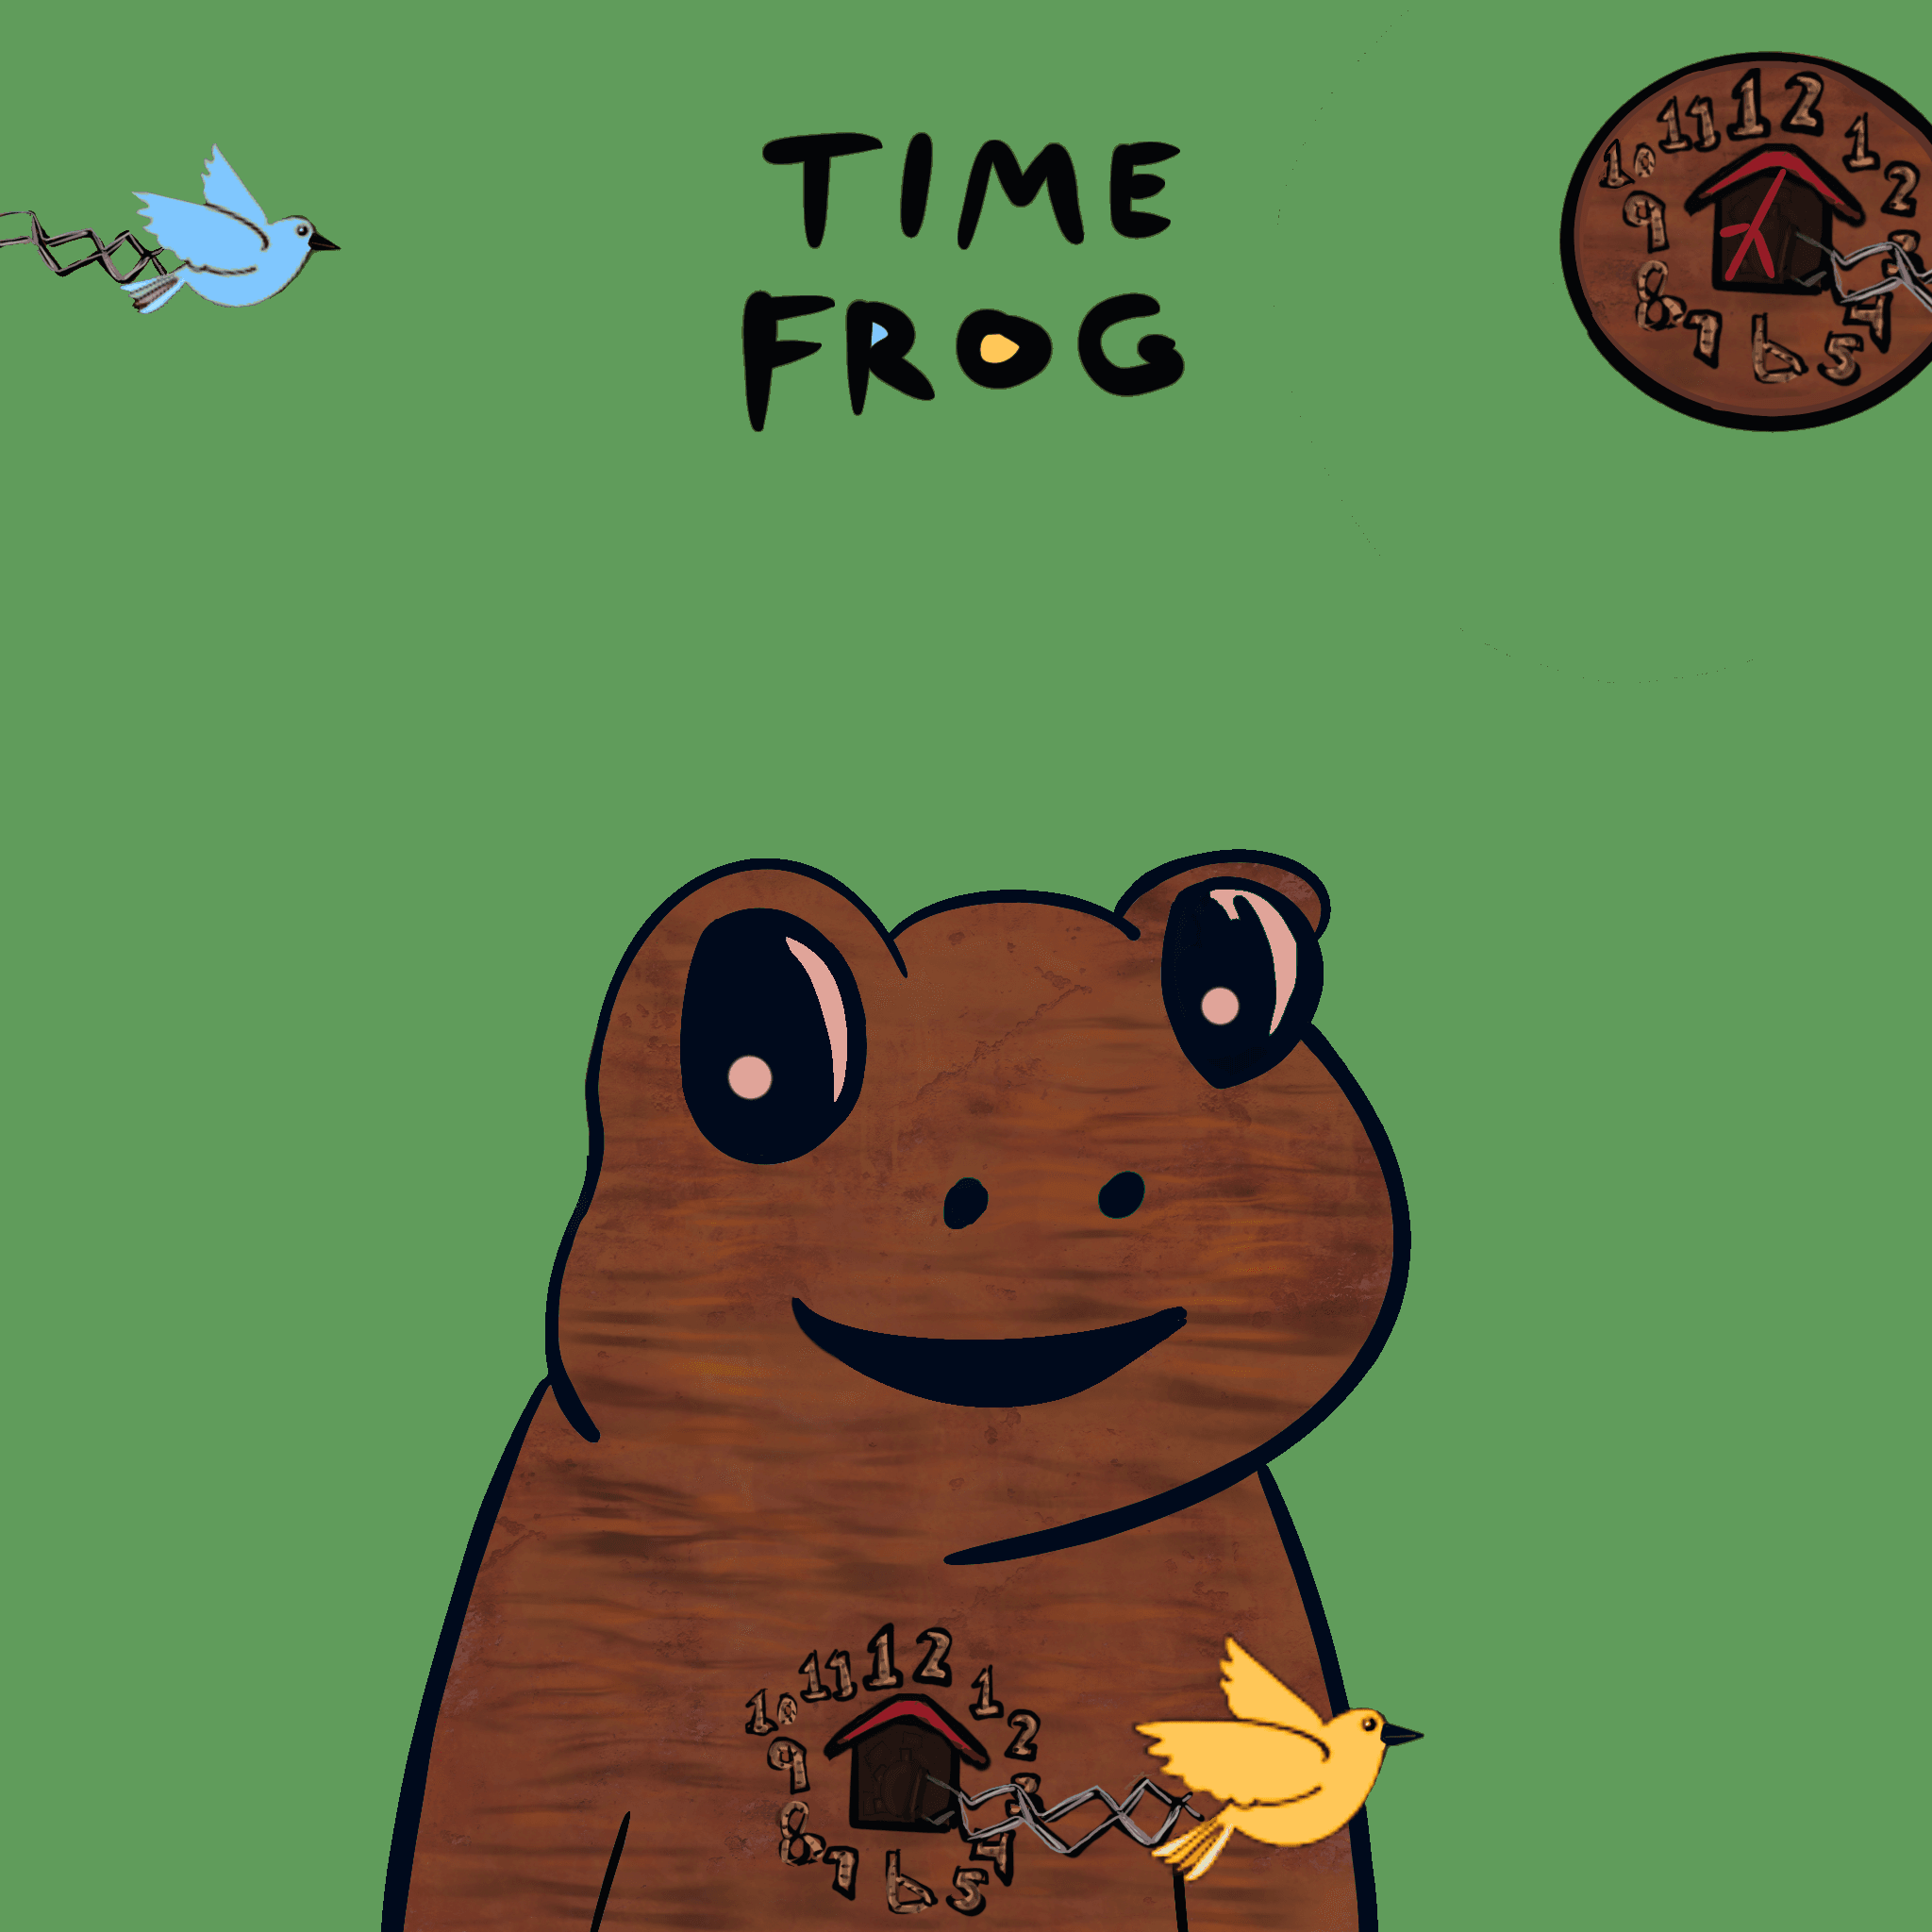 Peacefrogz #417 | Time Frog